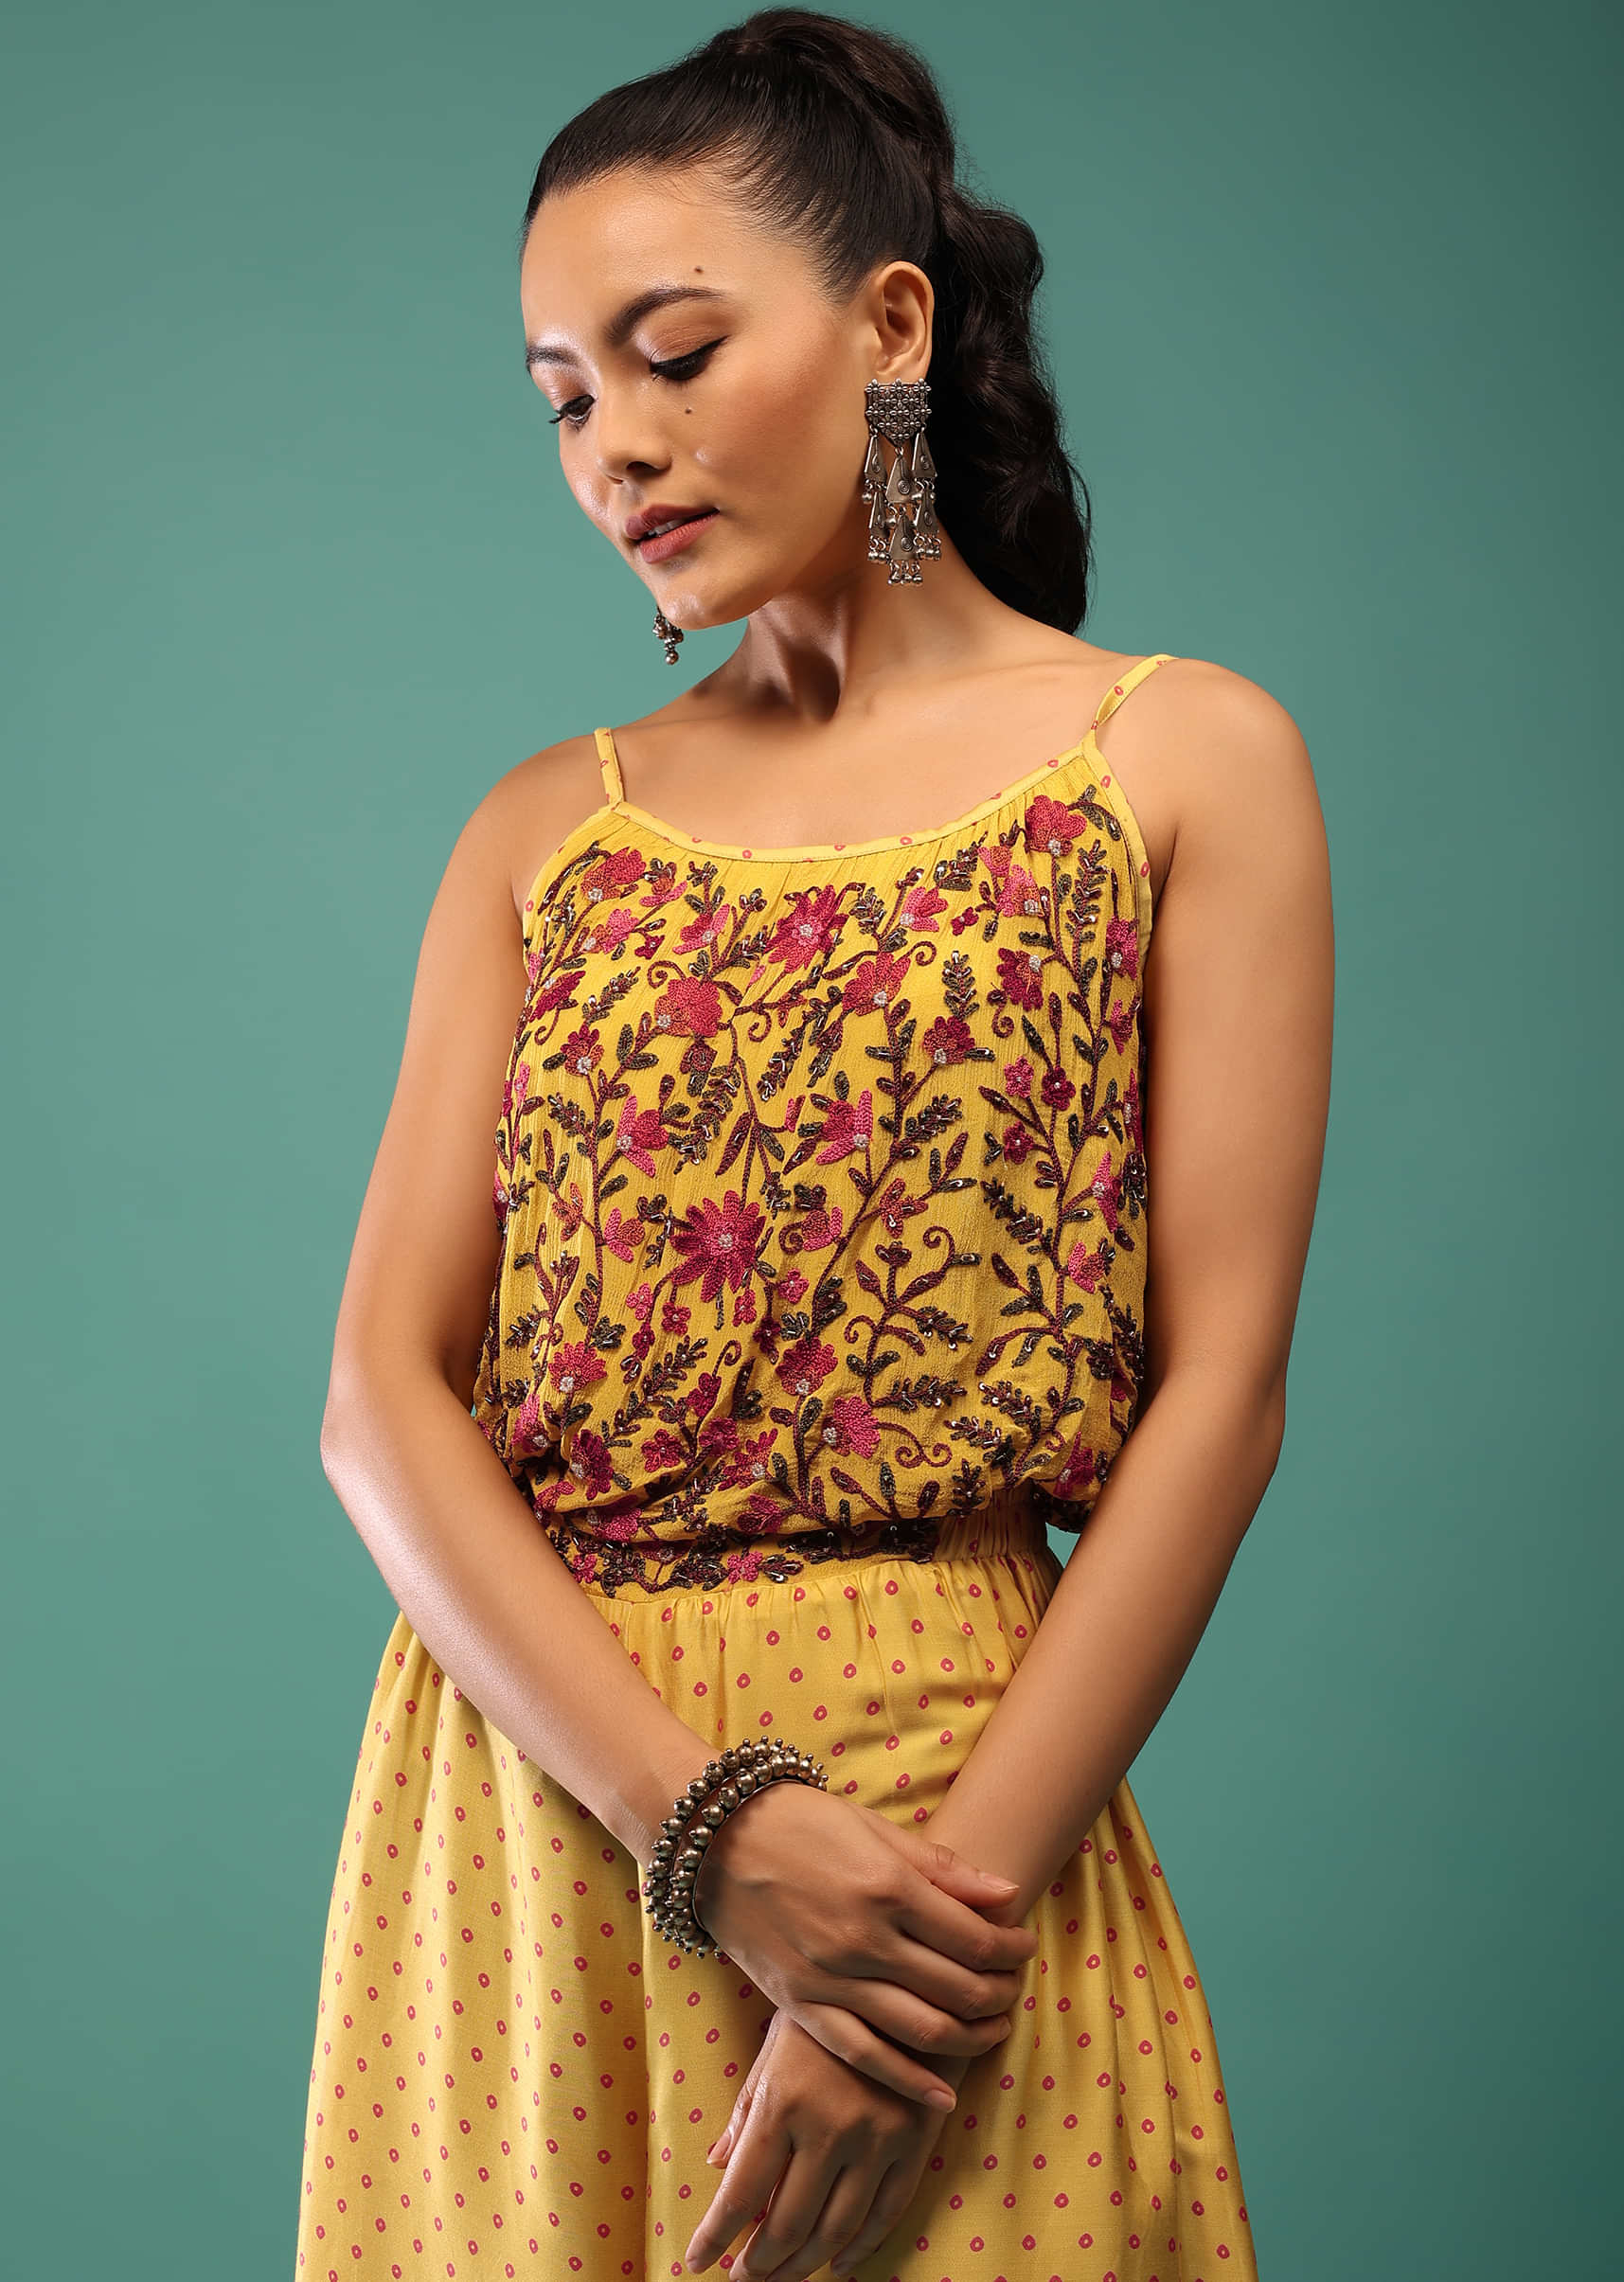 Yellow Jumpsuit With Thread, Sequins And A Floral Print